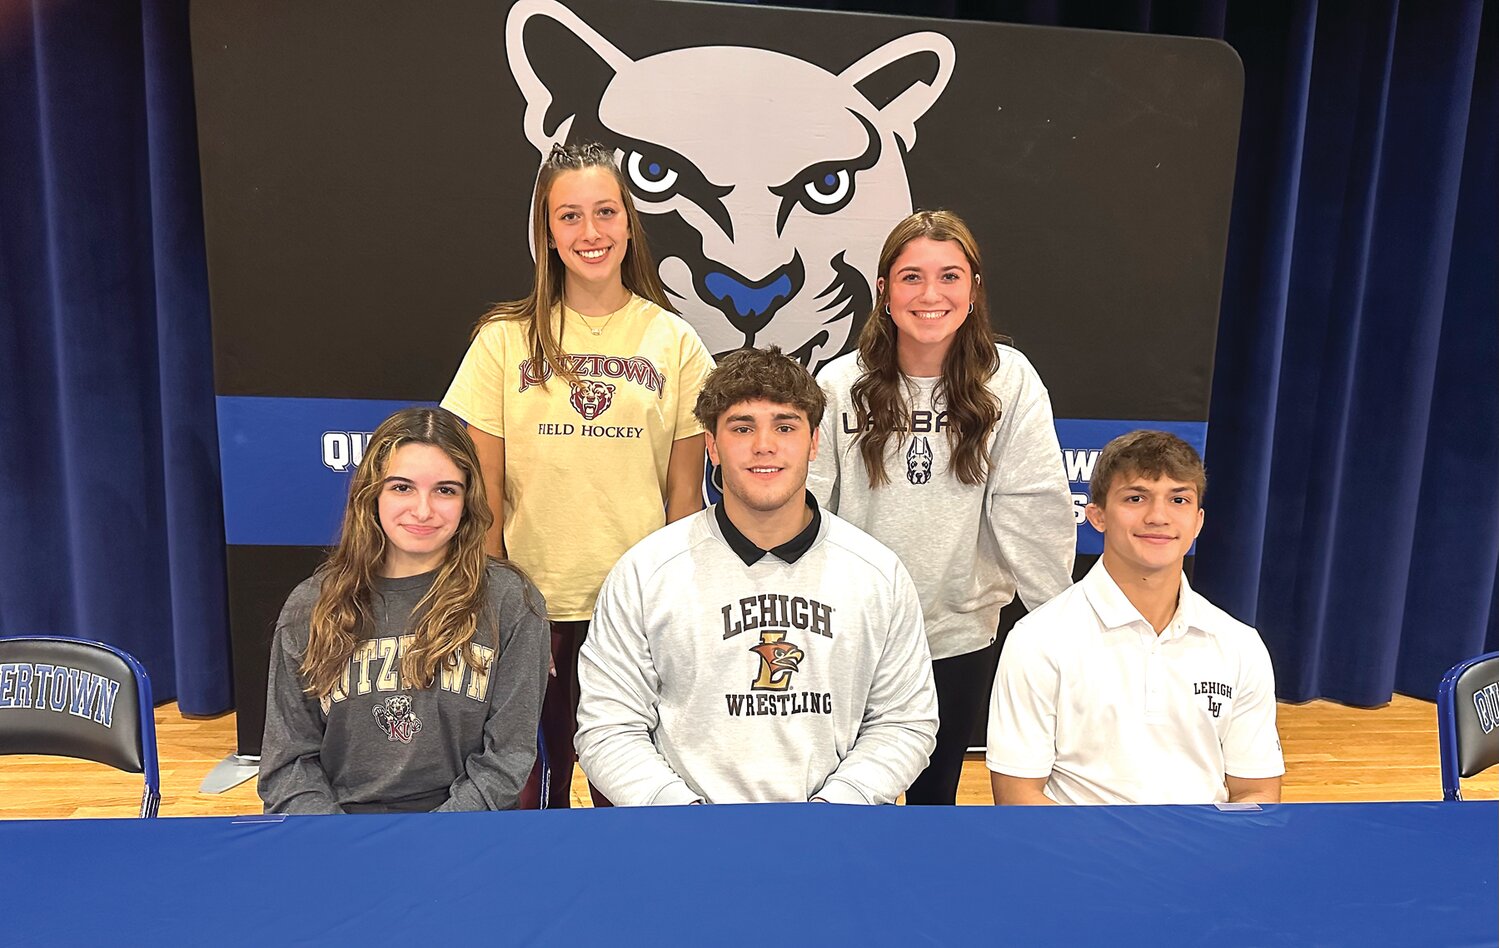 Five Quakertown seniors were recently recognized for their commitment to play at the collegiate level. From left are: Abbey Wagner, Kiera Gallagher, Calvin Lachman, Ava Beal and  Mason Ziegler.